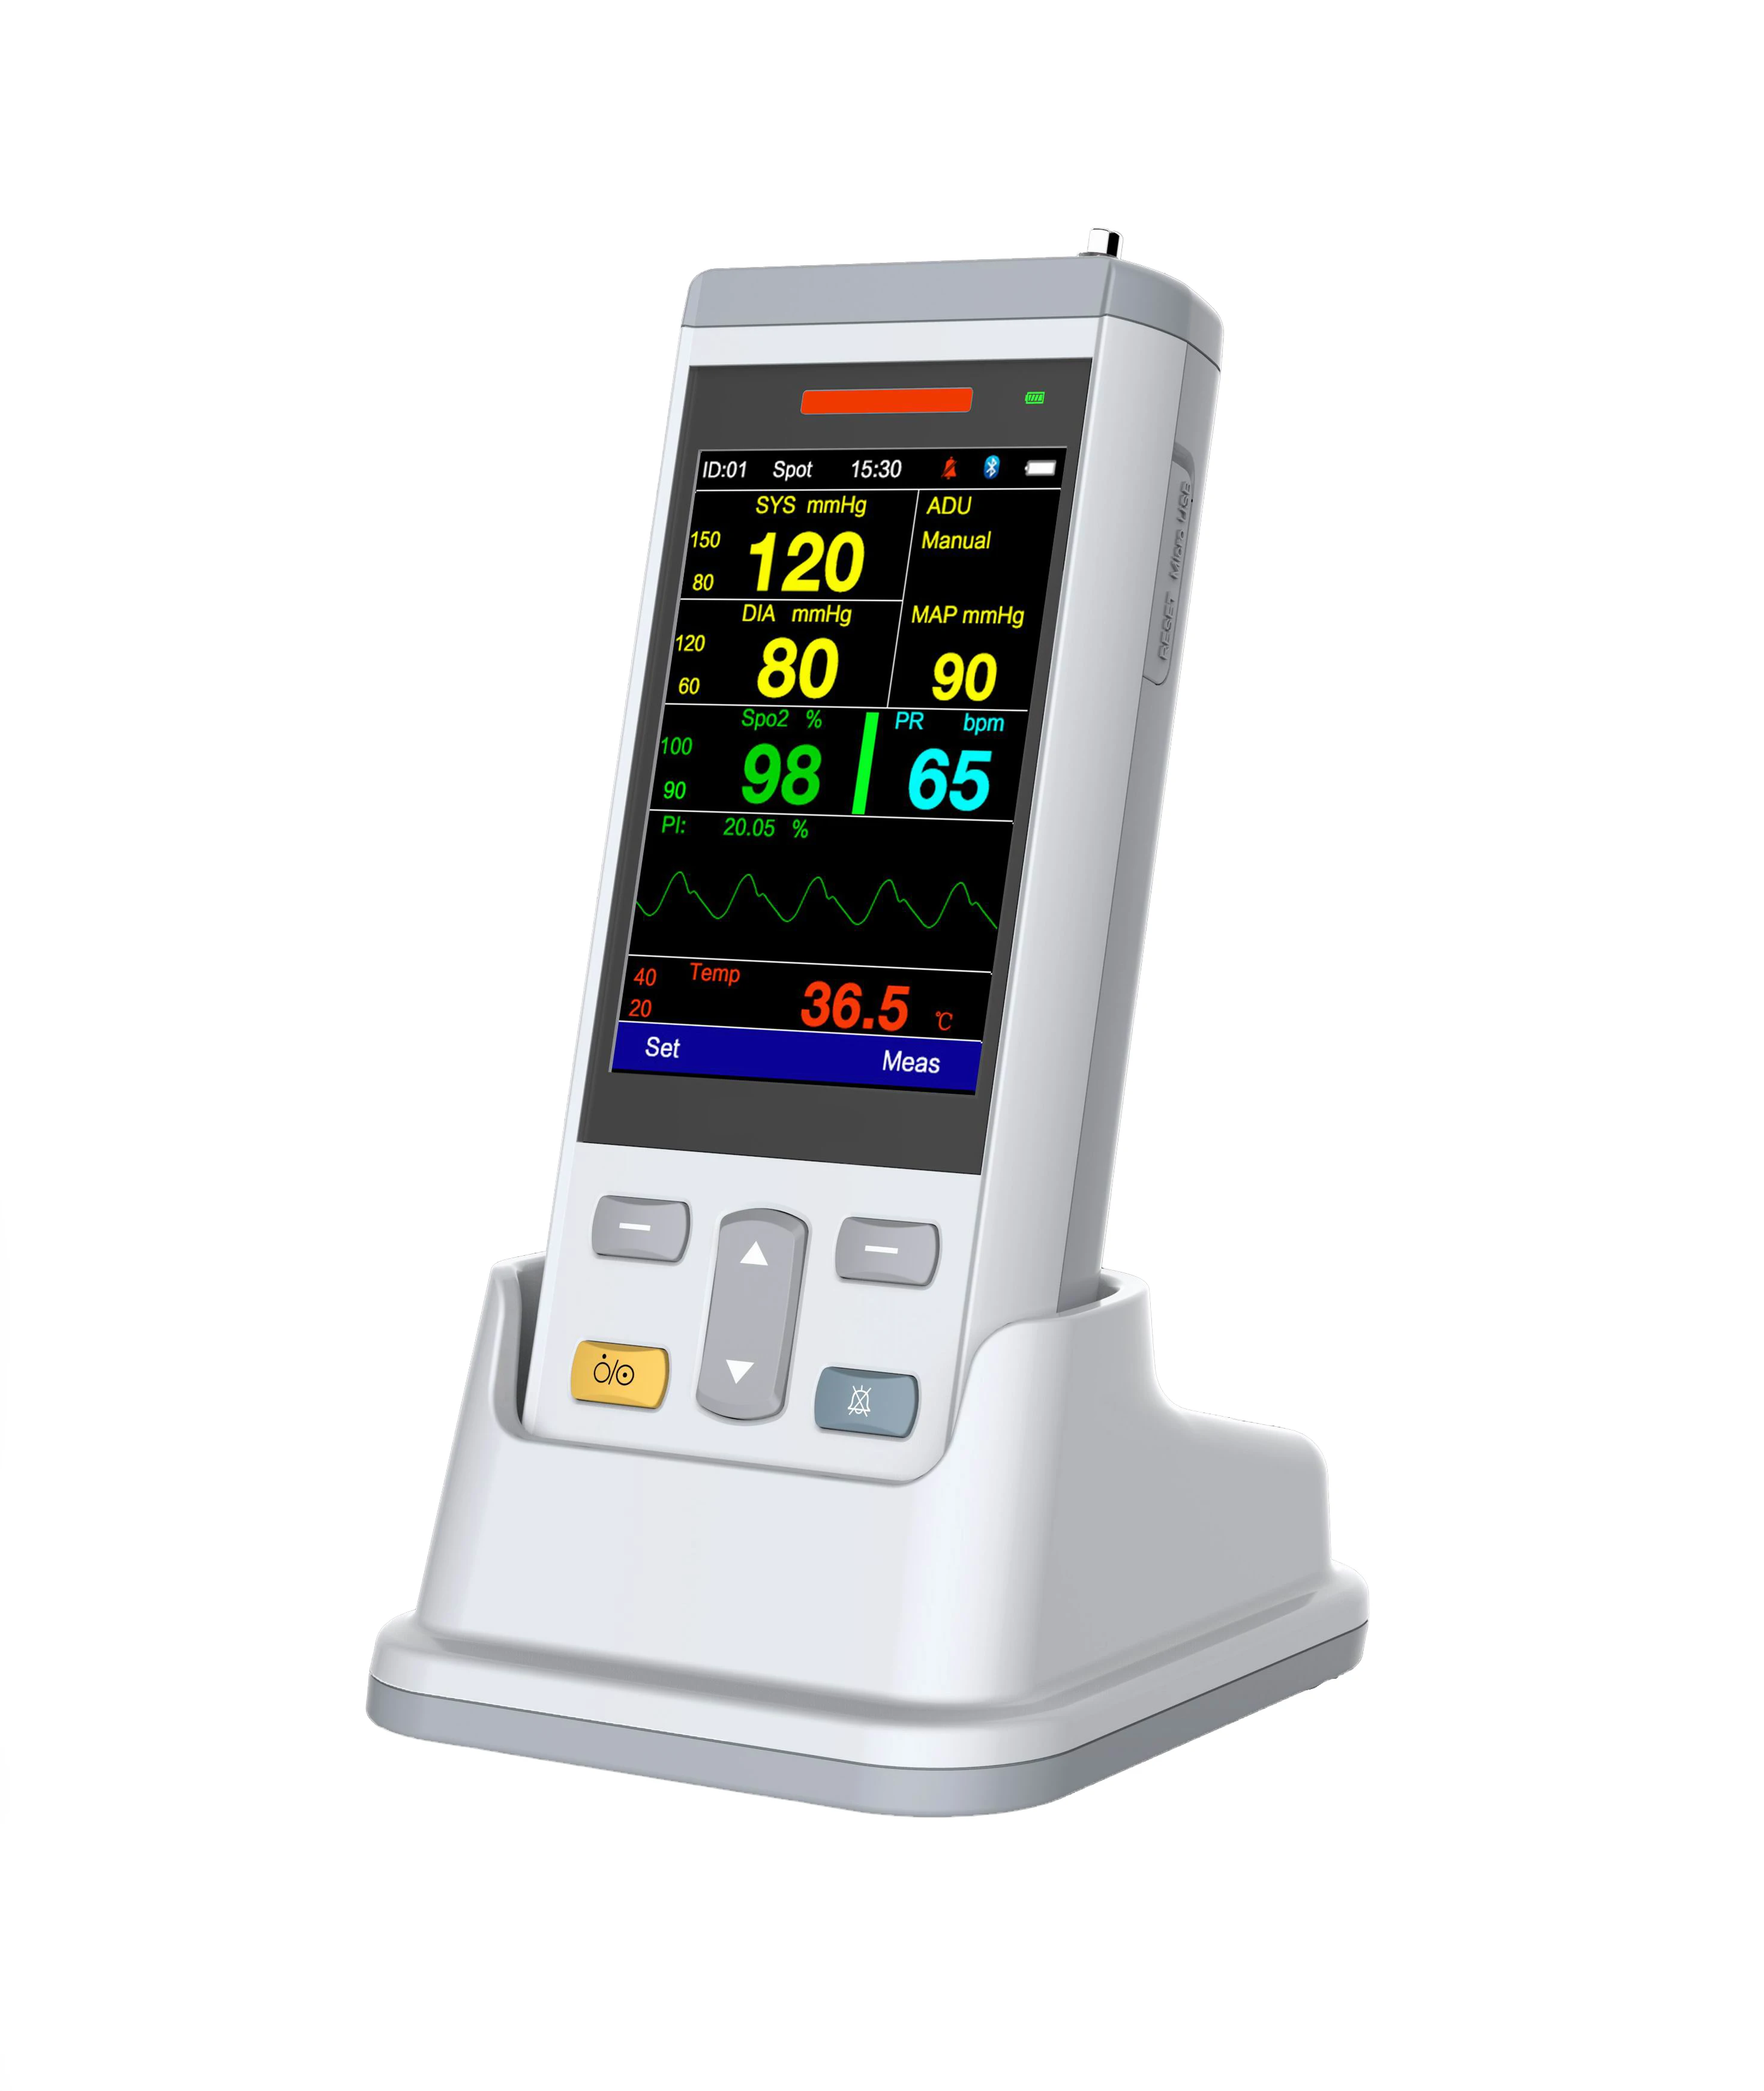 PC100 hospital equipement medical vital sign monitor price human portable multiparameter monitor with CE marked